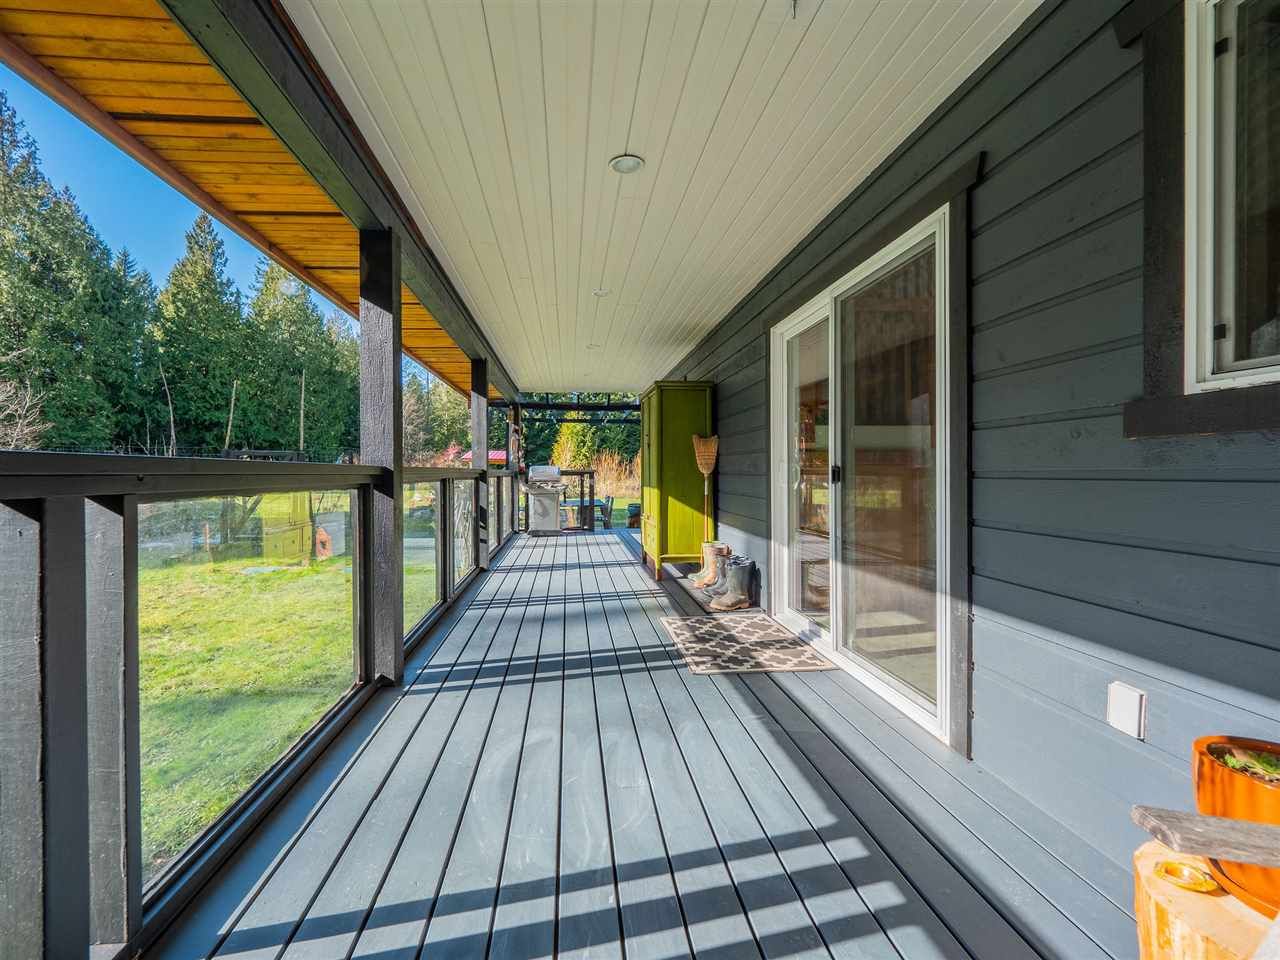 Main Photo: 1215 CHASTER Road in Gibsons: Gibsons & Area House for sale (Sunshine Coast)  : MLS®# R2541518